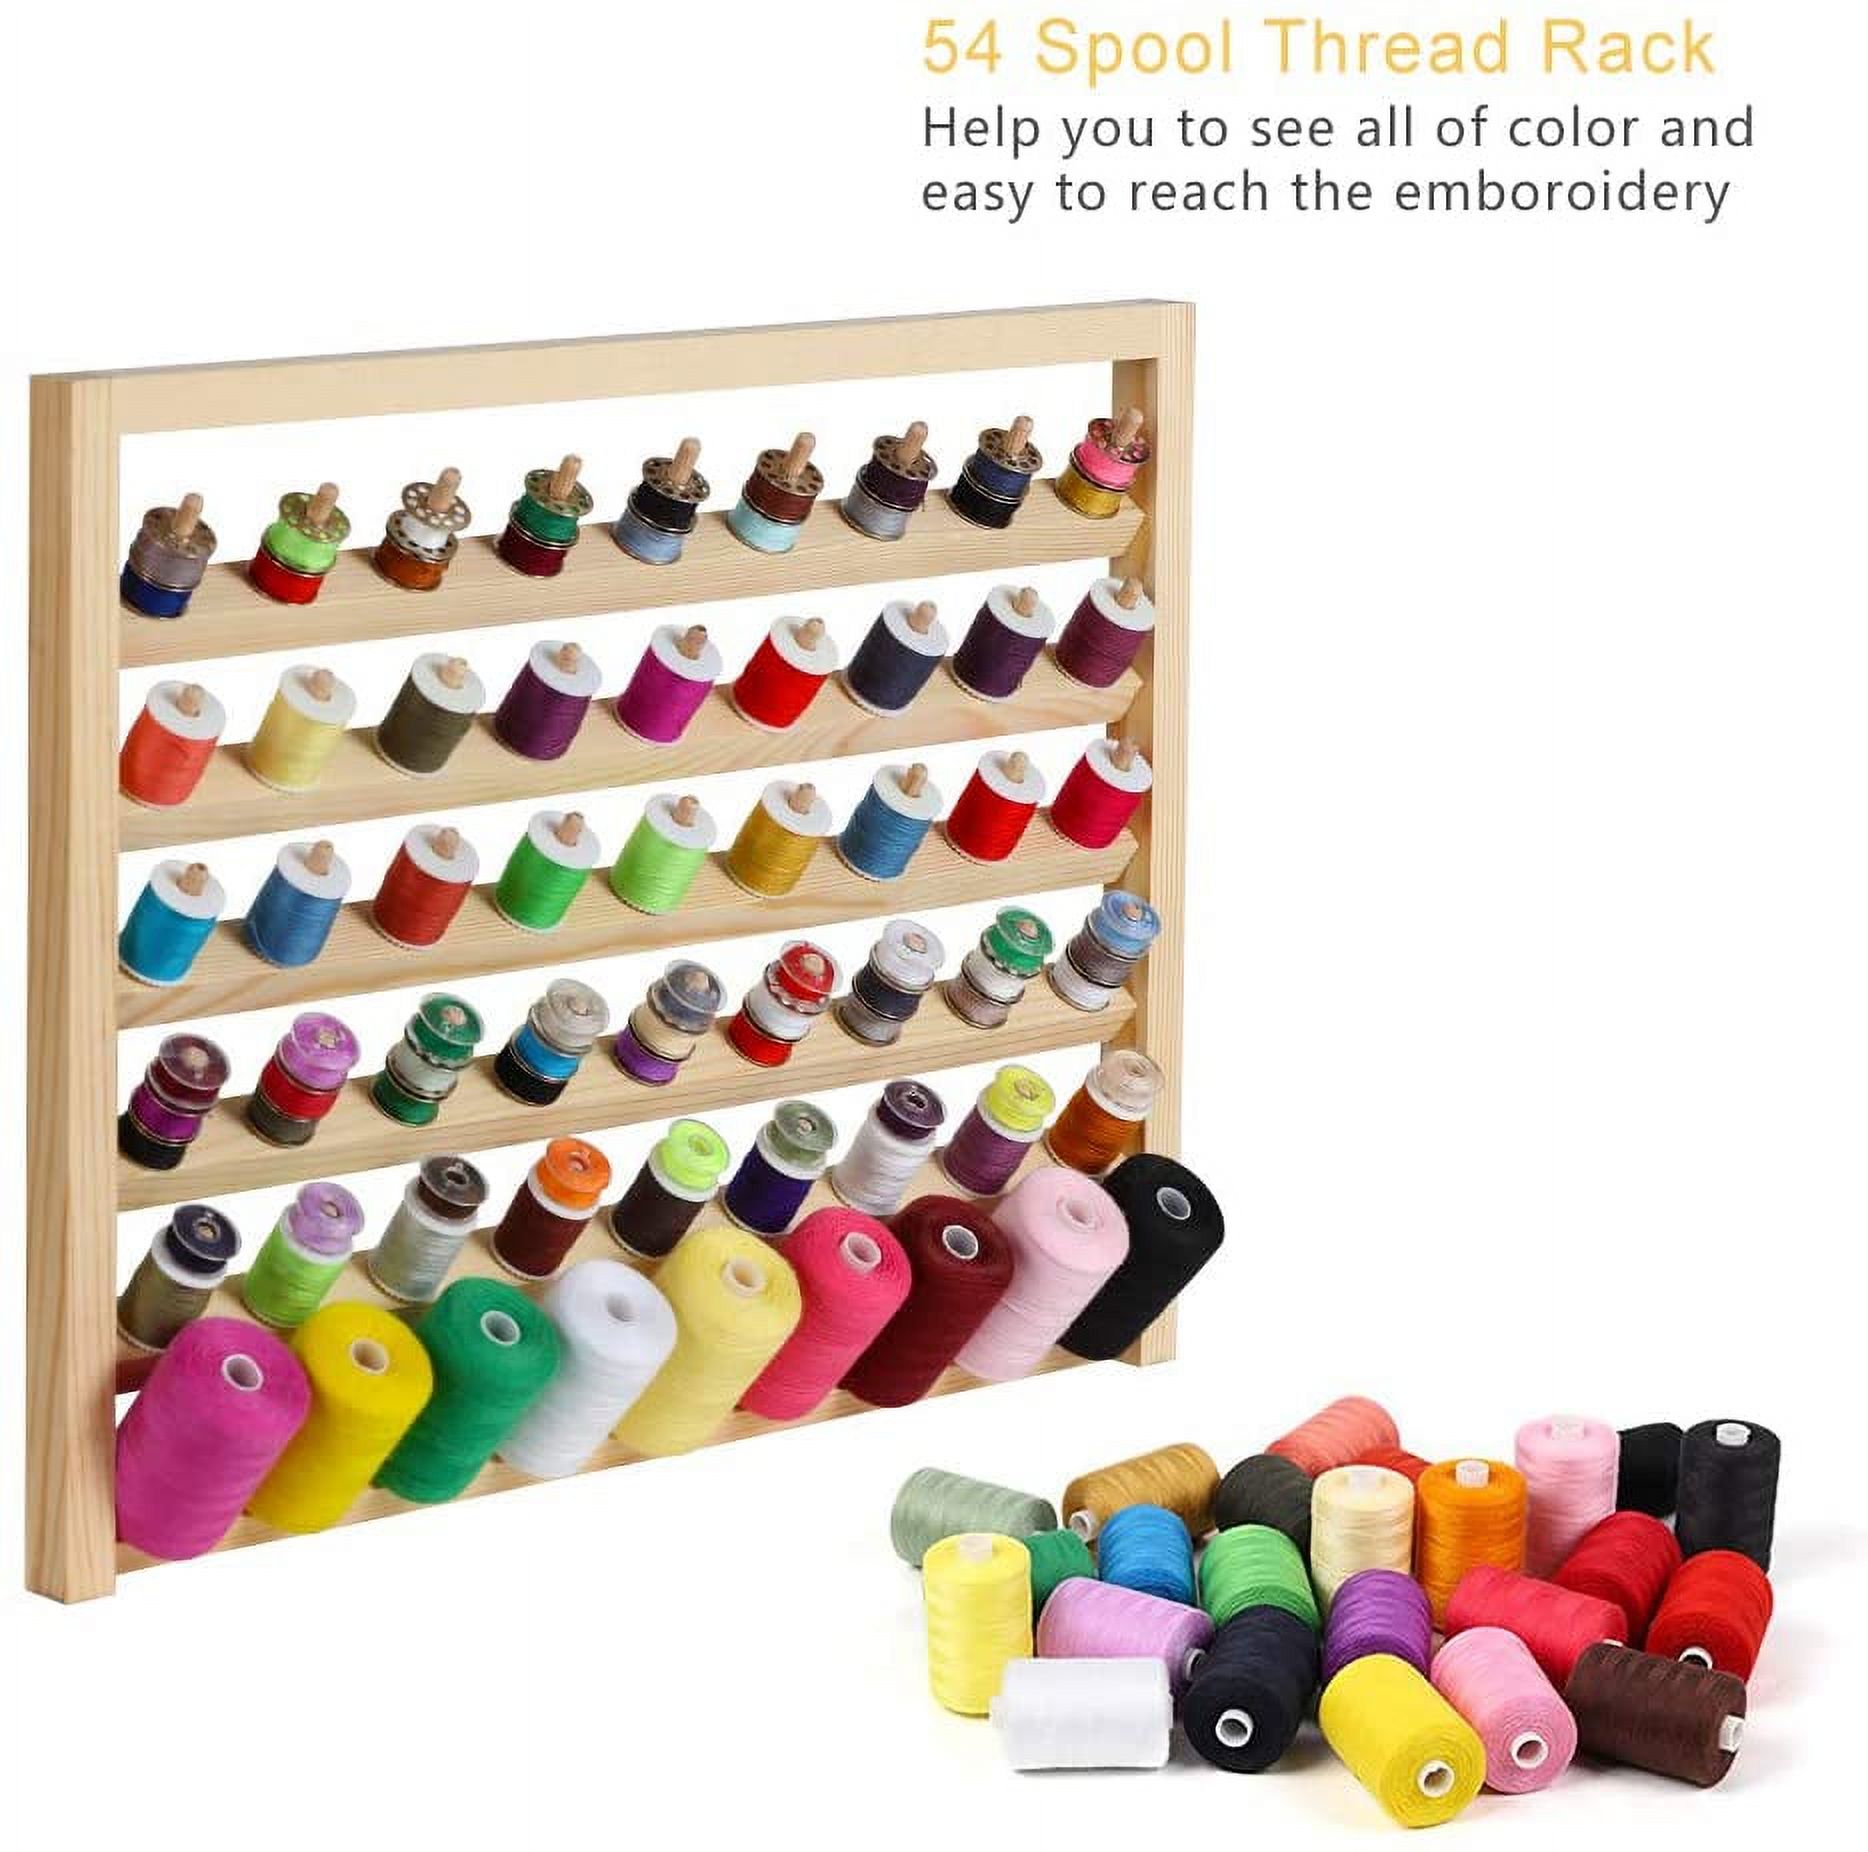 54-Spool Sewing Thread Rack, Wall-Mounted Sewing Thread Holder